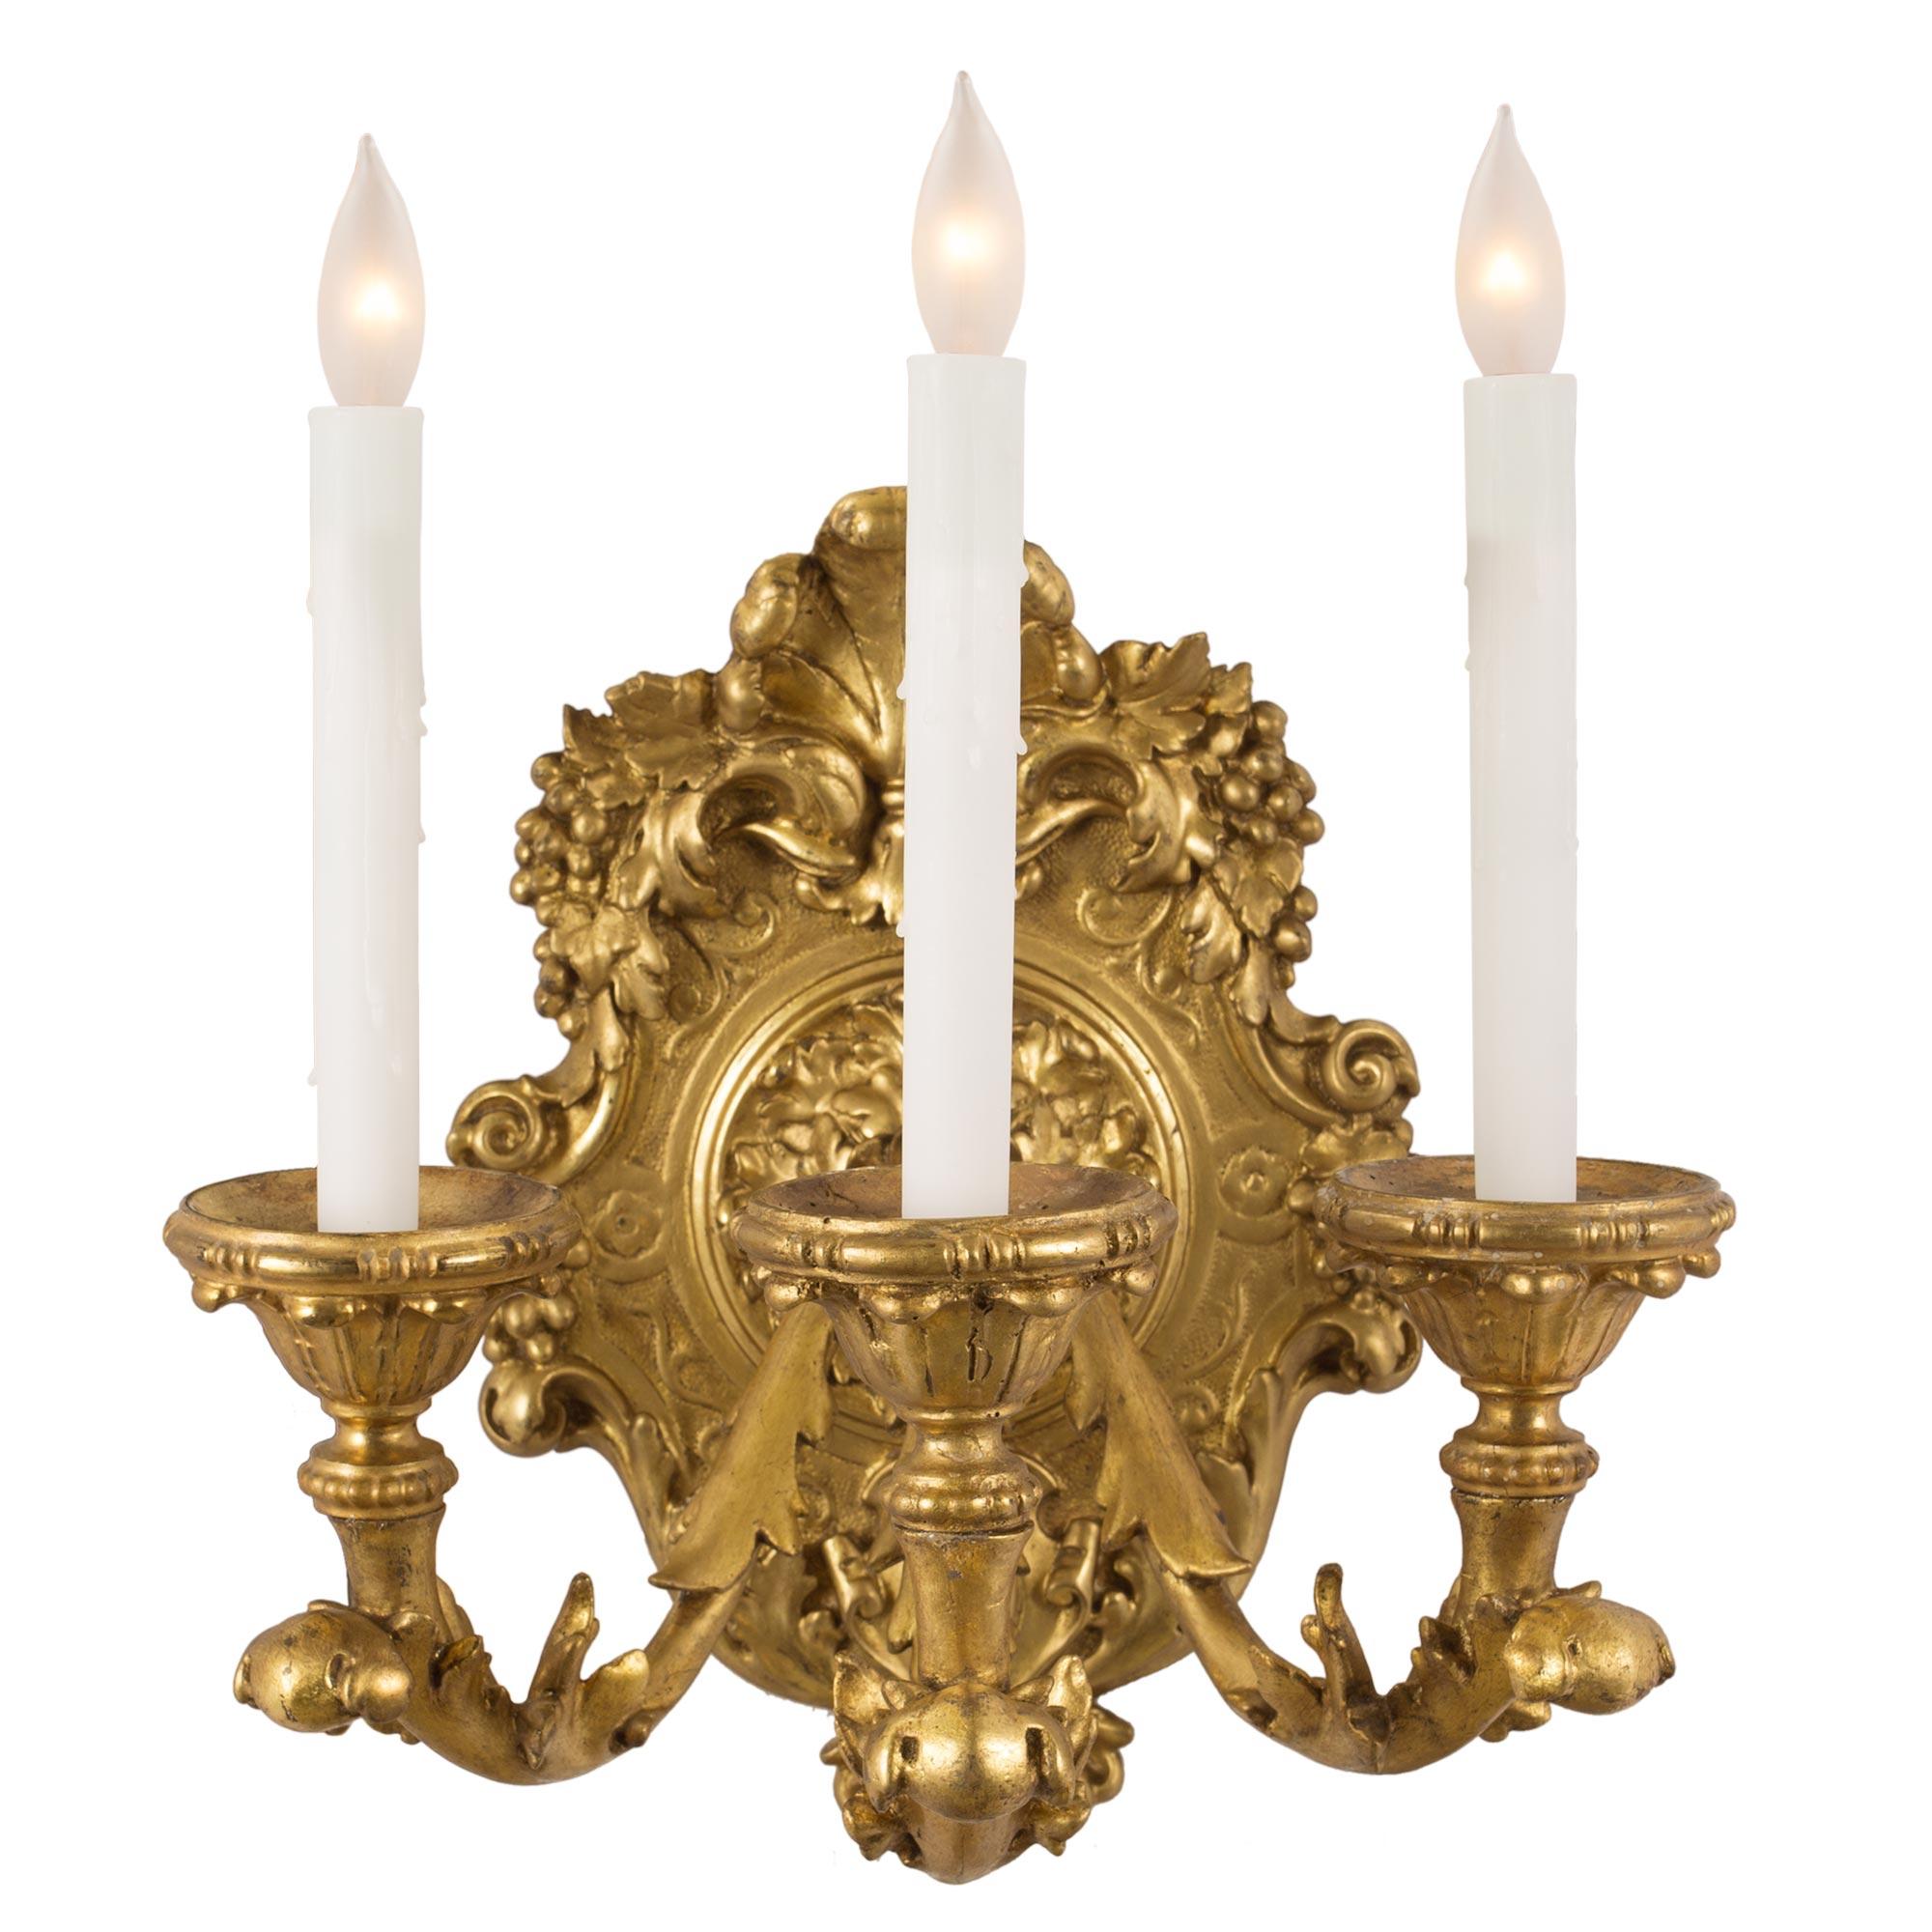 A pair of Italian early 19th century Louis XV st. three-arm giltwood sconces. The sconces with an oval back plate are decorated with richly carved acanthus leaves amidst scrolls. At the top is a central feather spray flanked by grape clusters and